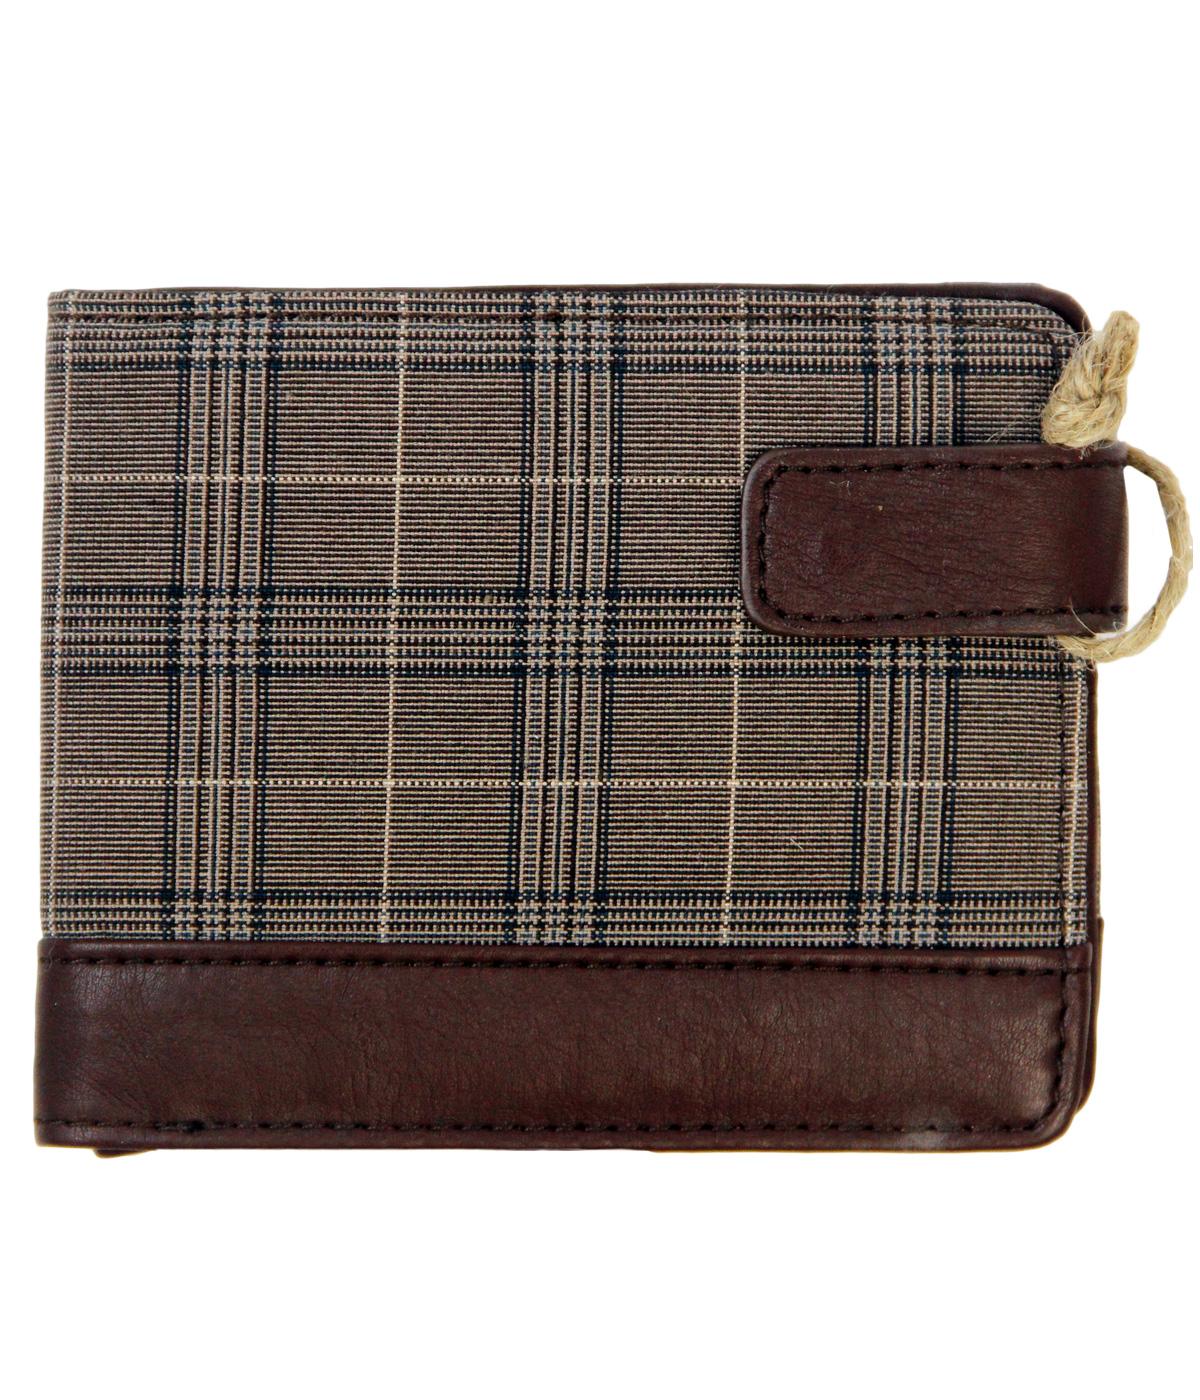 DUNLOP Retro Prince of Wales Check Wallet